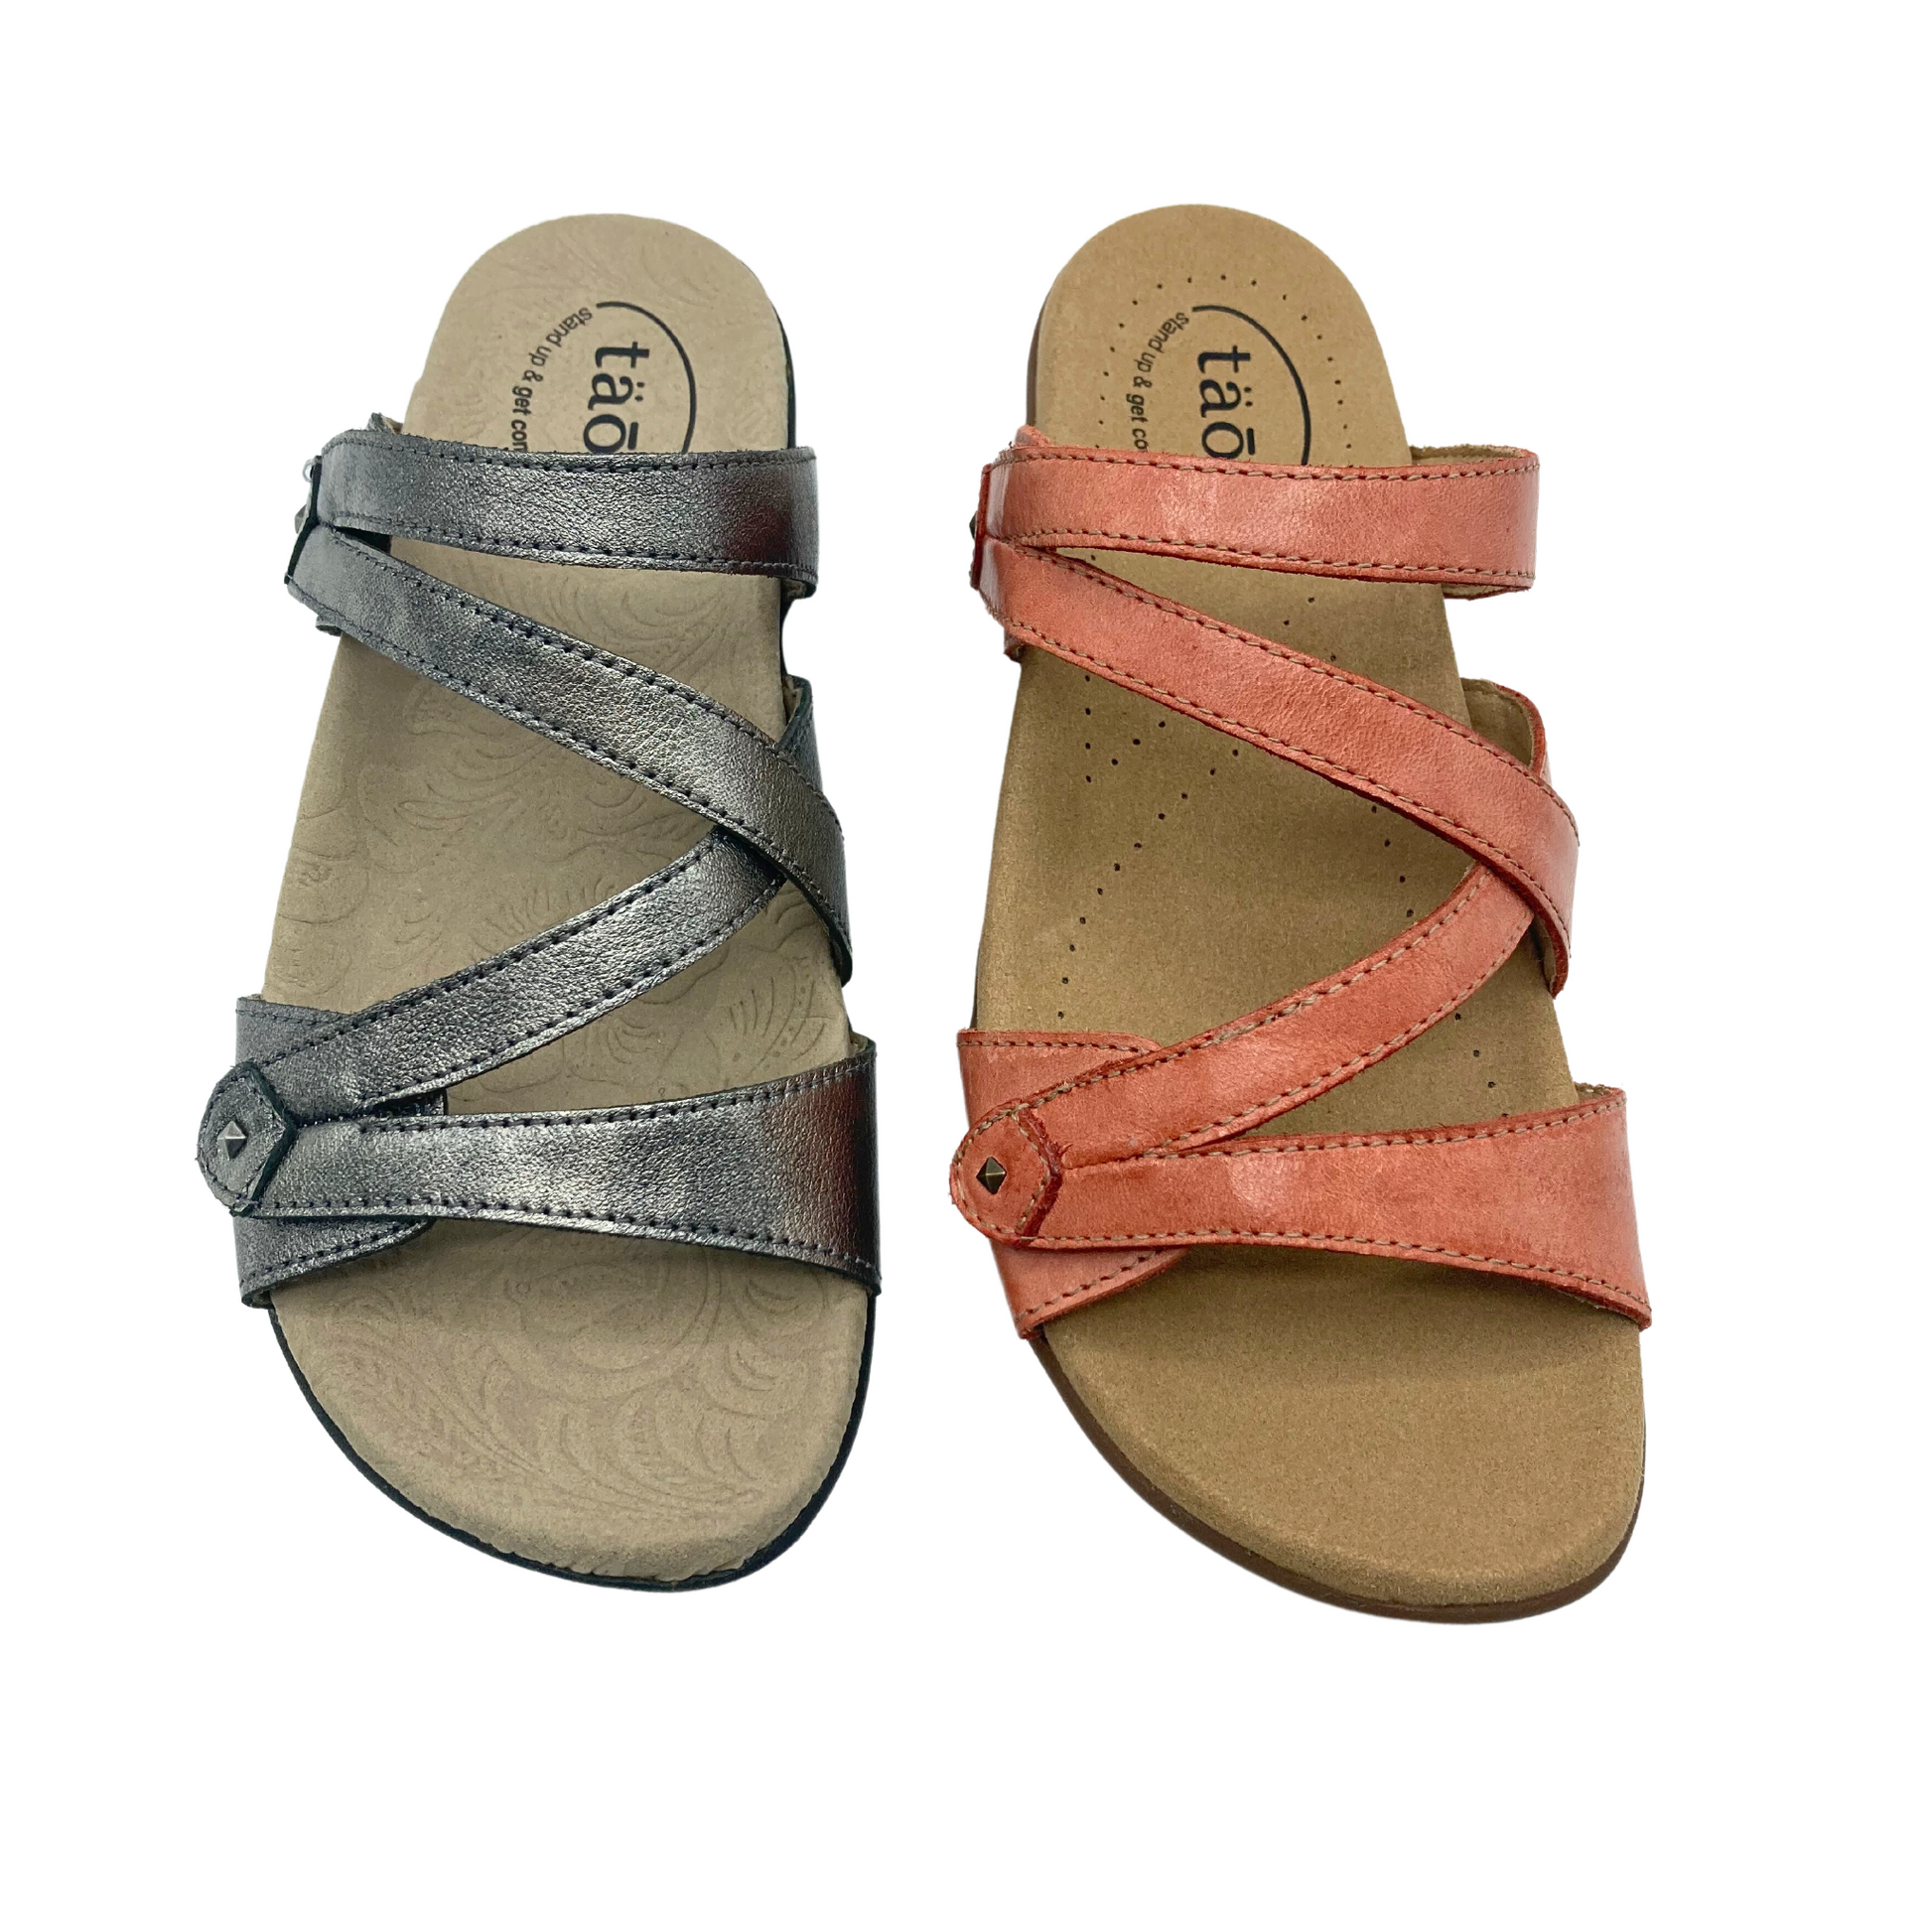 Top down view of the Taos Double U sandal in both Pewter and Bruschetta colors